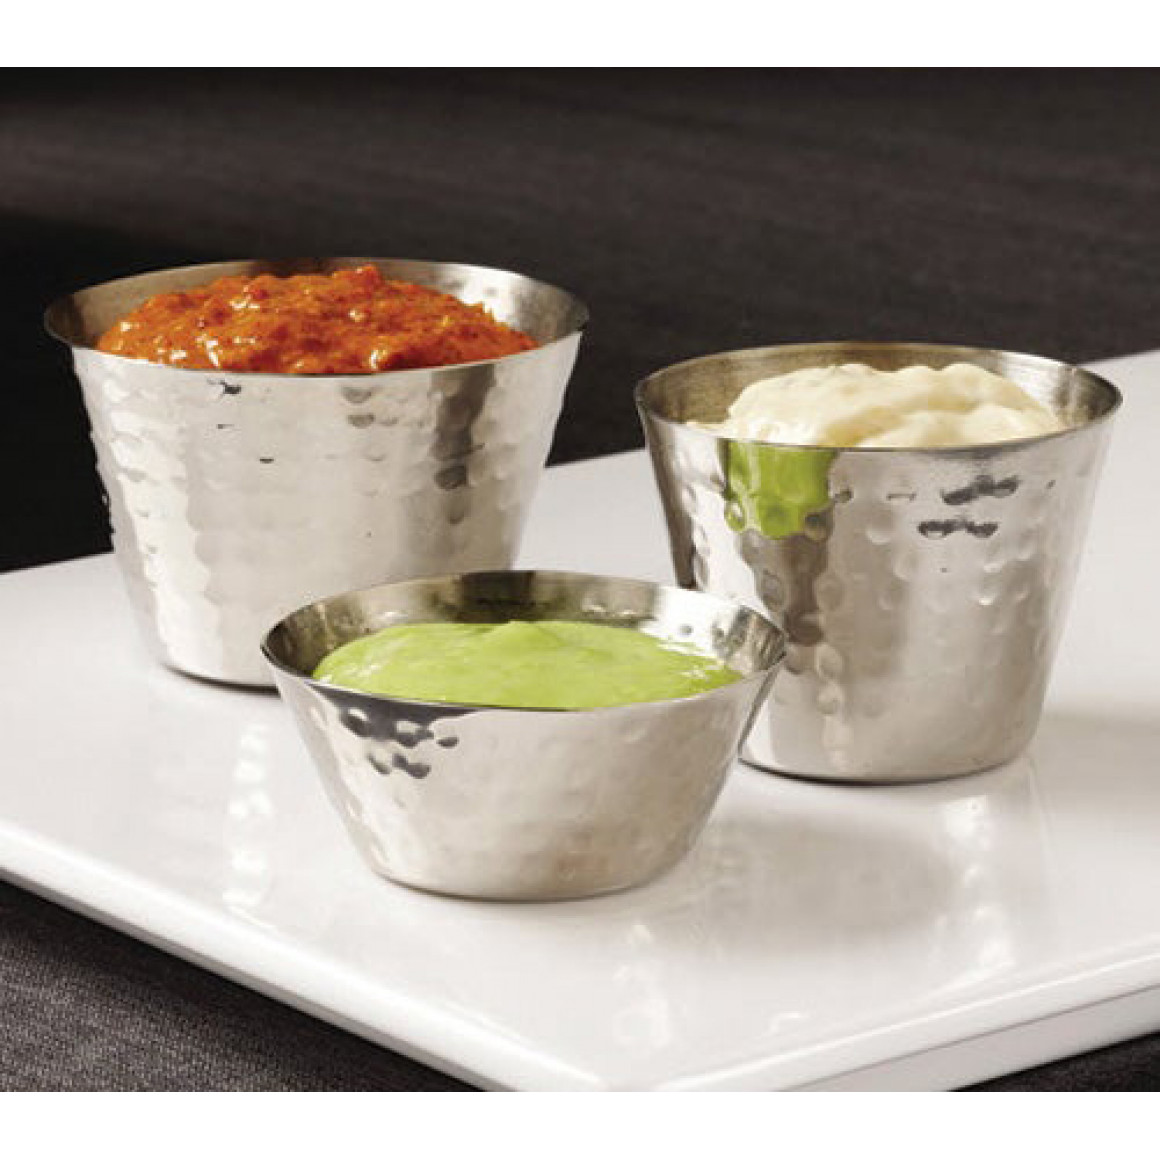 SAUCE CUP, STAINLESS STEEL, ROUND, HAMMERED, 1.5 OZ.